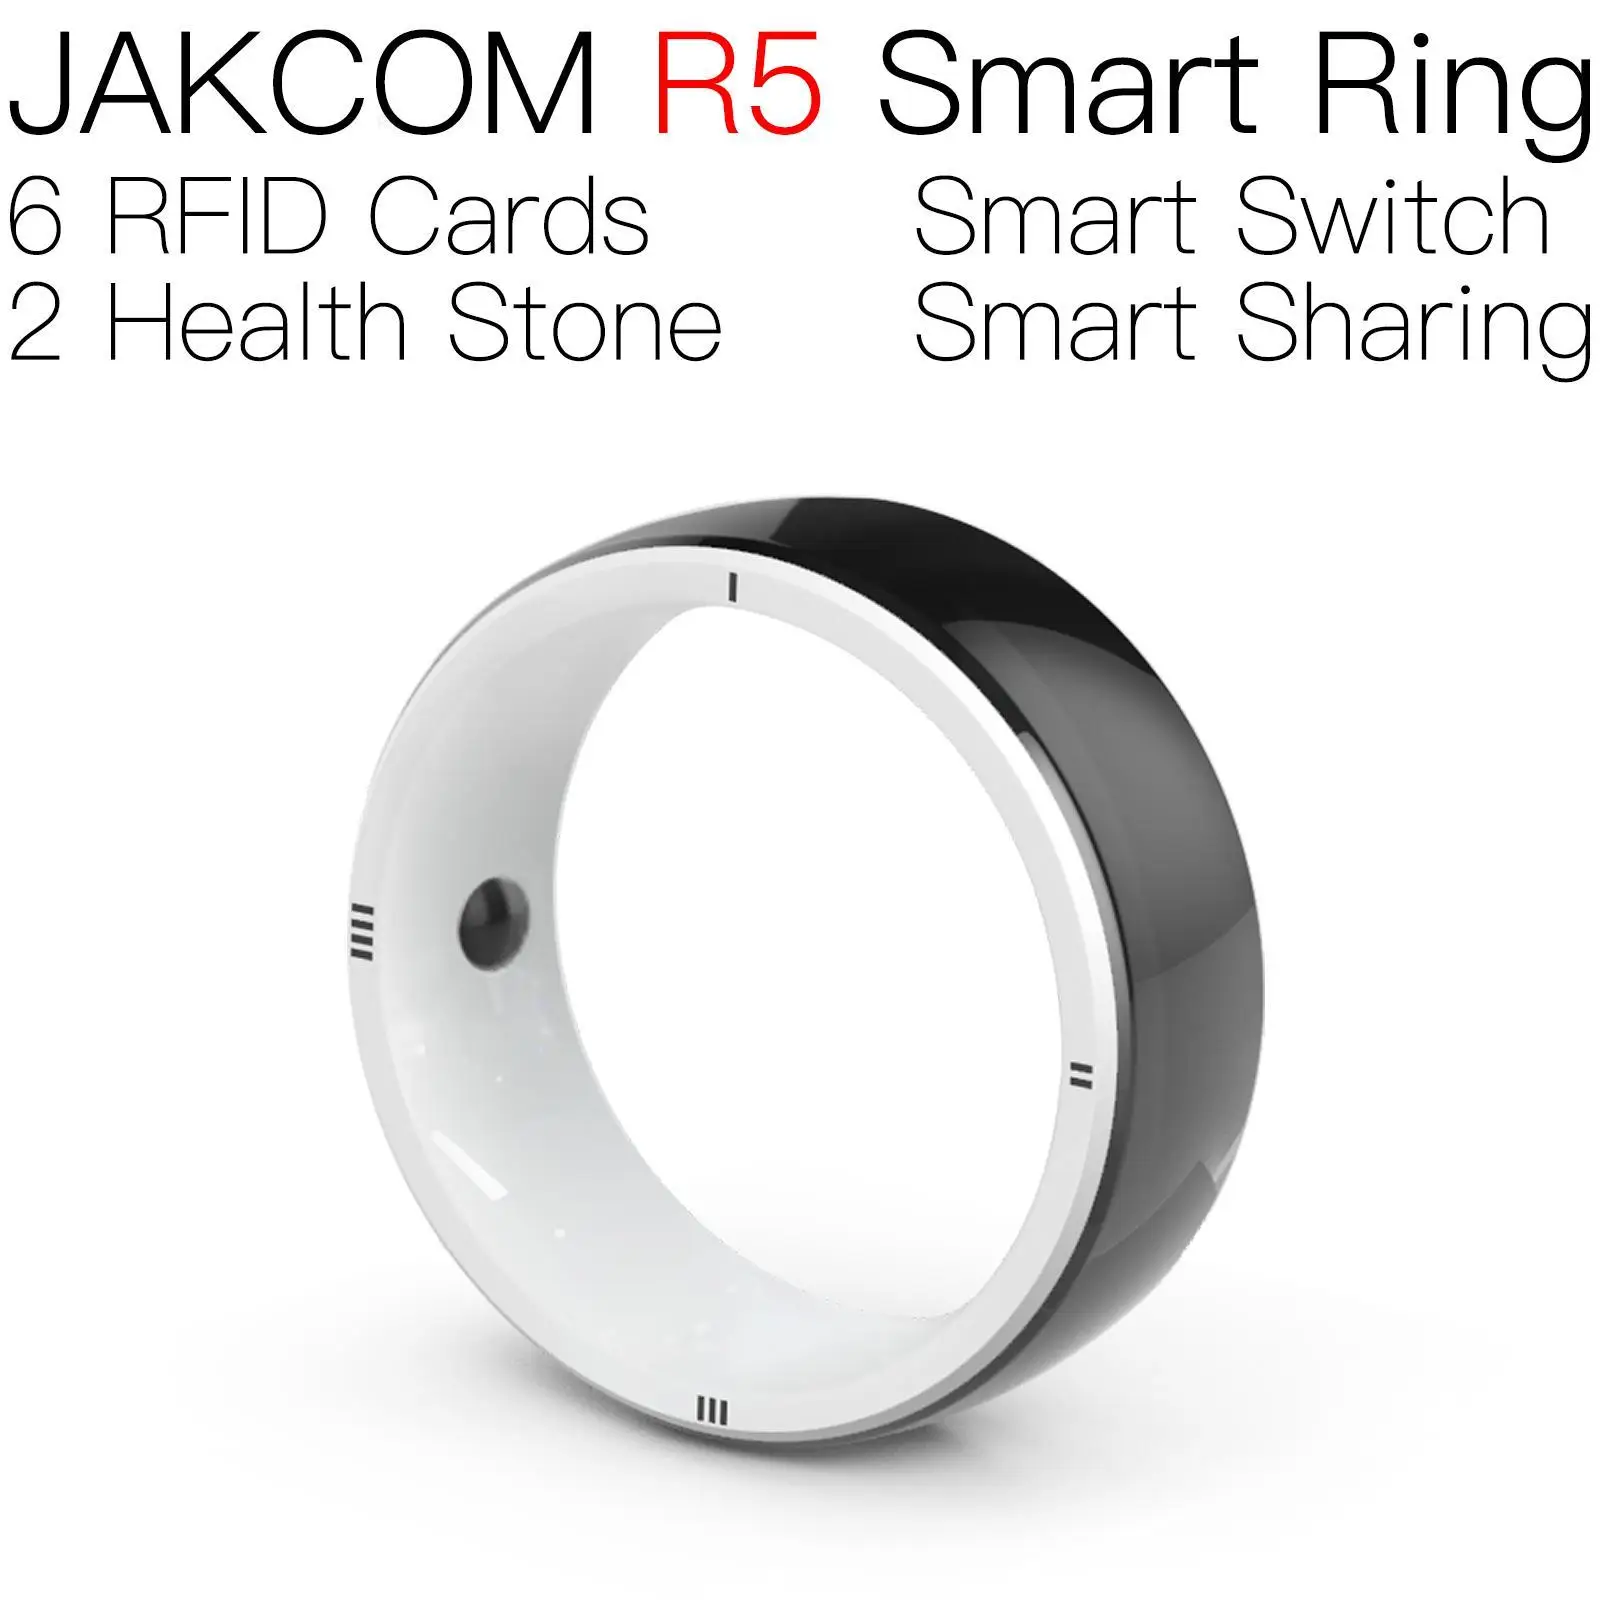 

JAKCOM R5 Smart Ring New arrival as parking time uhf rfid nfc chip implant ring nano ic card immobilizer car cattle